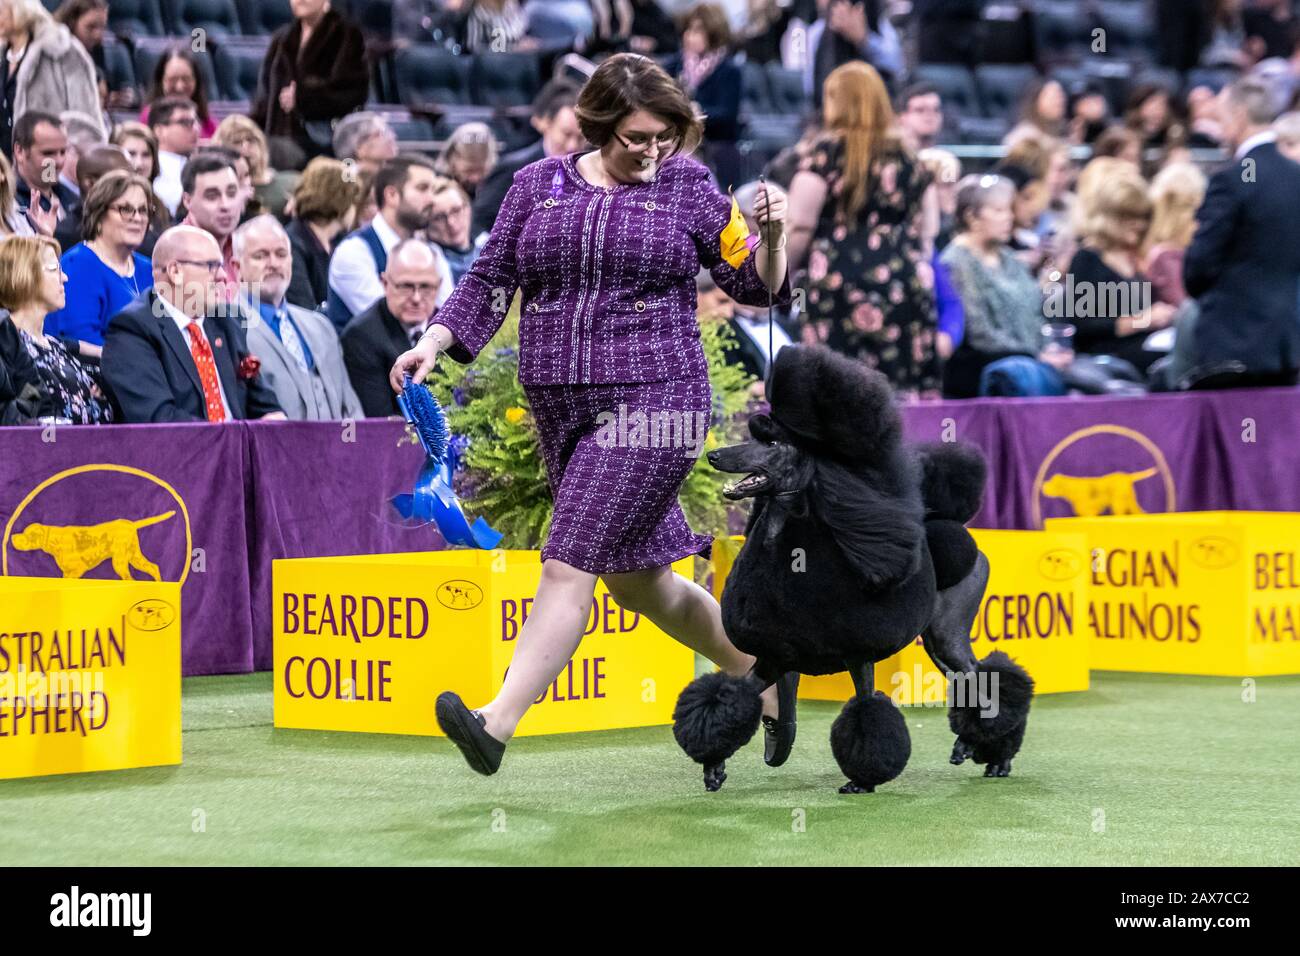 New York, USA. 10th Feb, 2020. Handler Chrystal Clas from Northampton, Pennsylvania, and her Standard Poodle Siba walk away with the prize after winning the Non-sporting group category at the 144th Westminster Kennel Club Dog show in New York city's Madison Square Garden.  GCHP Stone Run Afternoon Tea, aka Siba, owned by Connie Unger and William Lee, also won Best of Breed for standard poodles earlier in the day. Credit: Enrique Shore/Alamy Live News Stock Photo